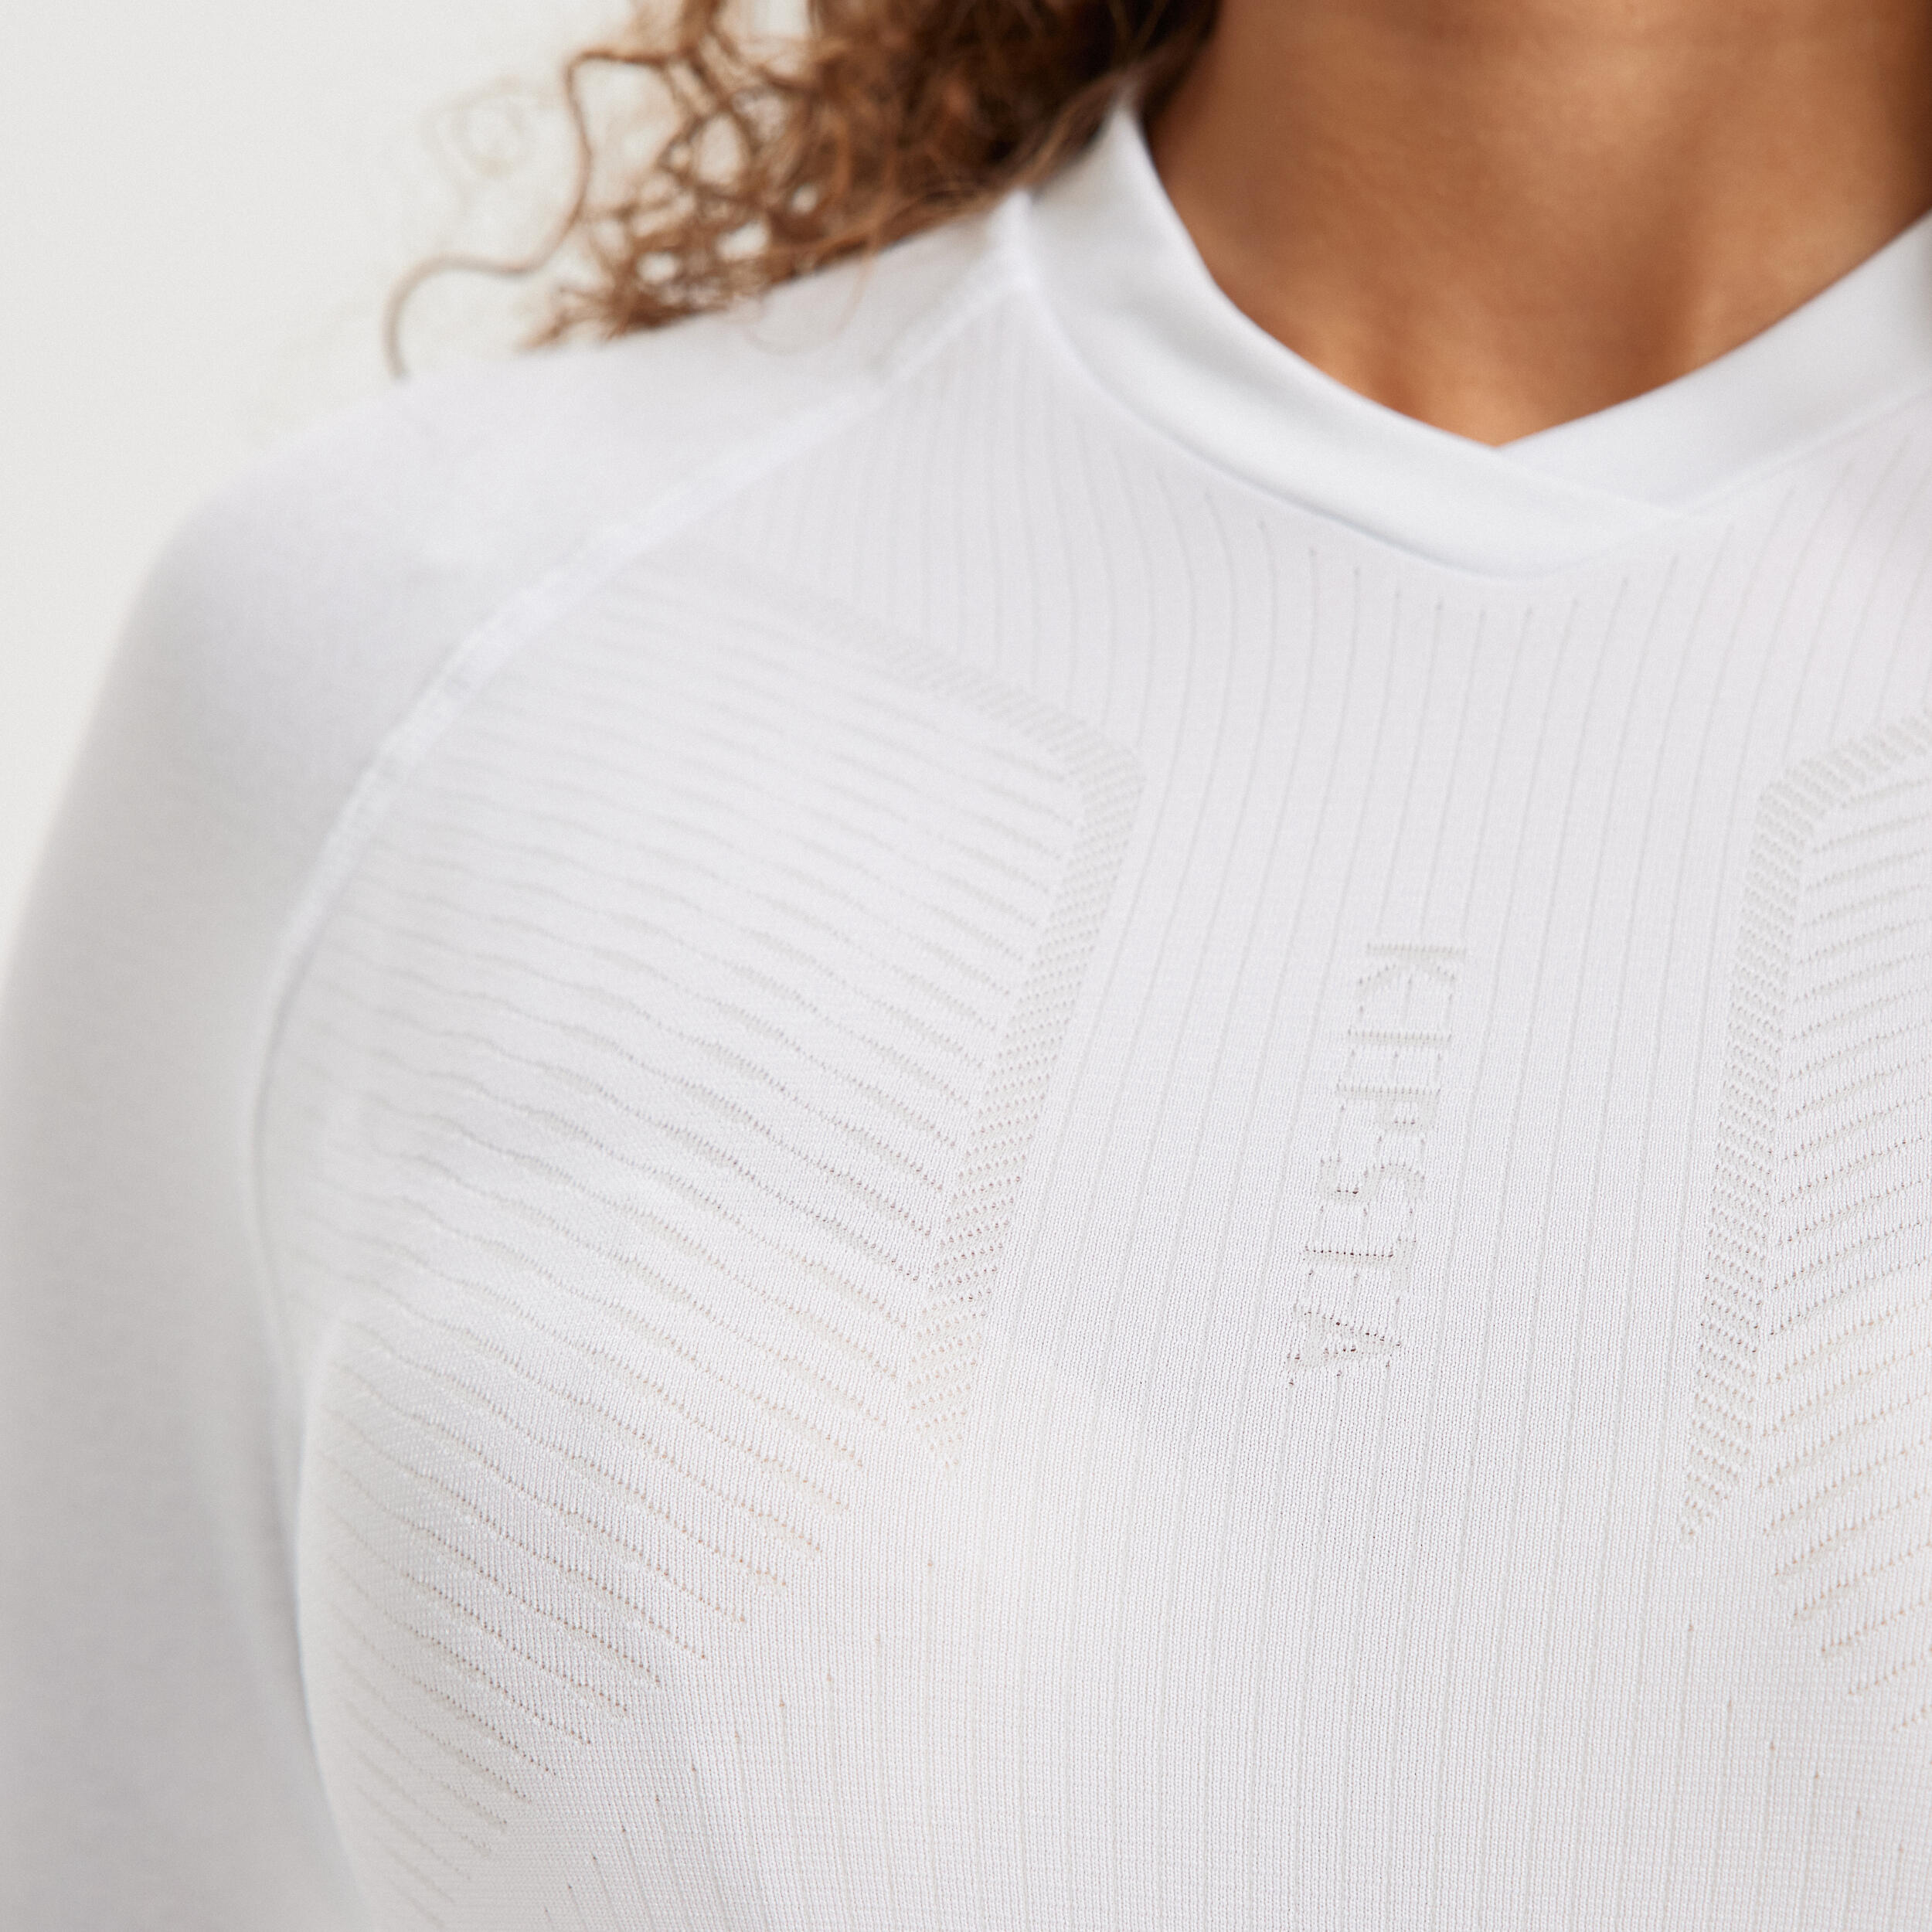 Adult Long-Sleeved Thermal Base Layer Top Keepdry 500 - White 6/13